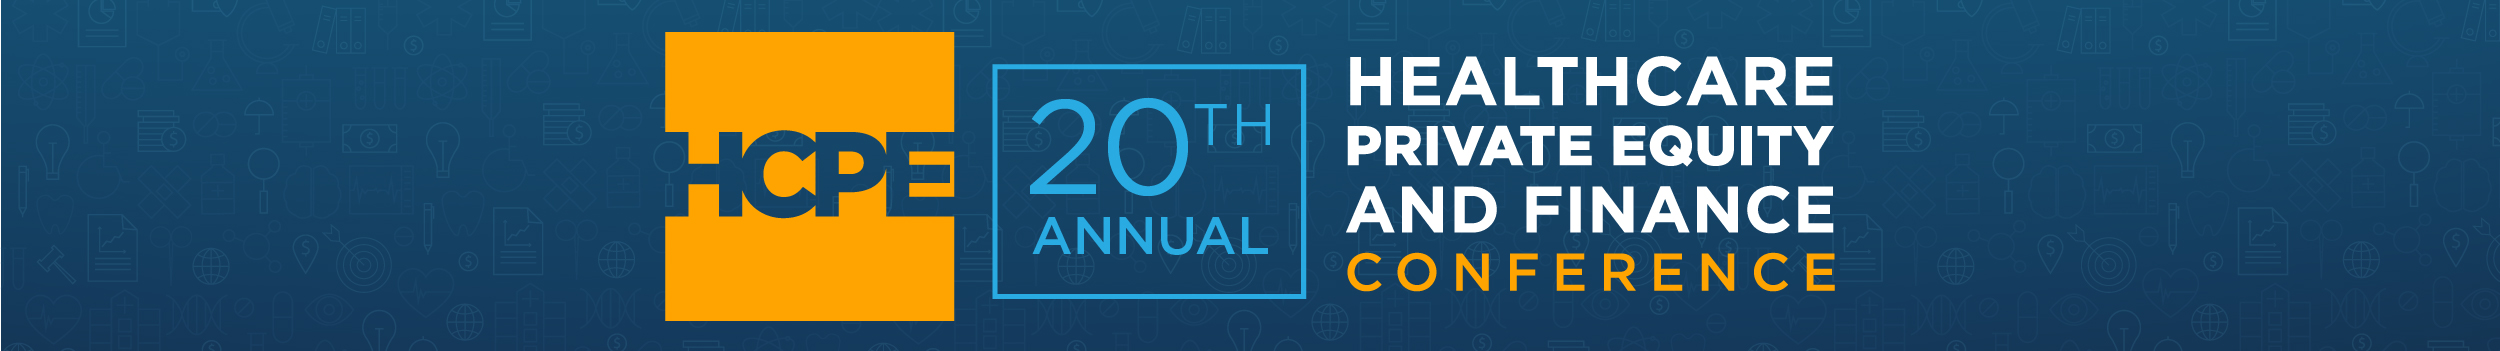 20th Annual Healthcare Private Equity and Finance Conference